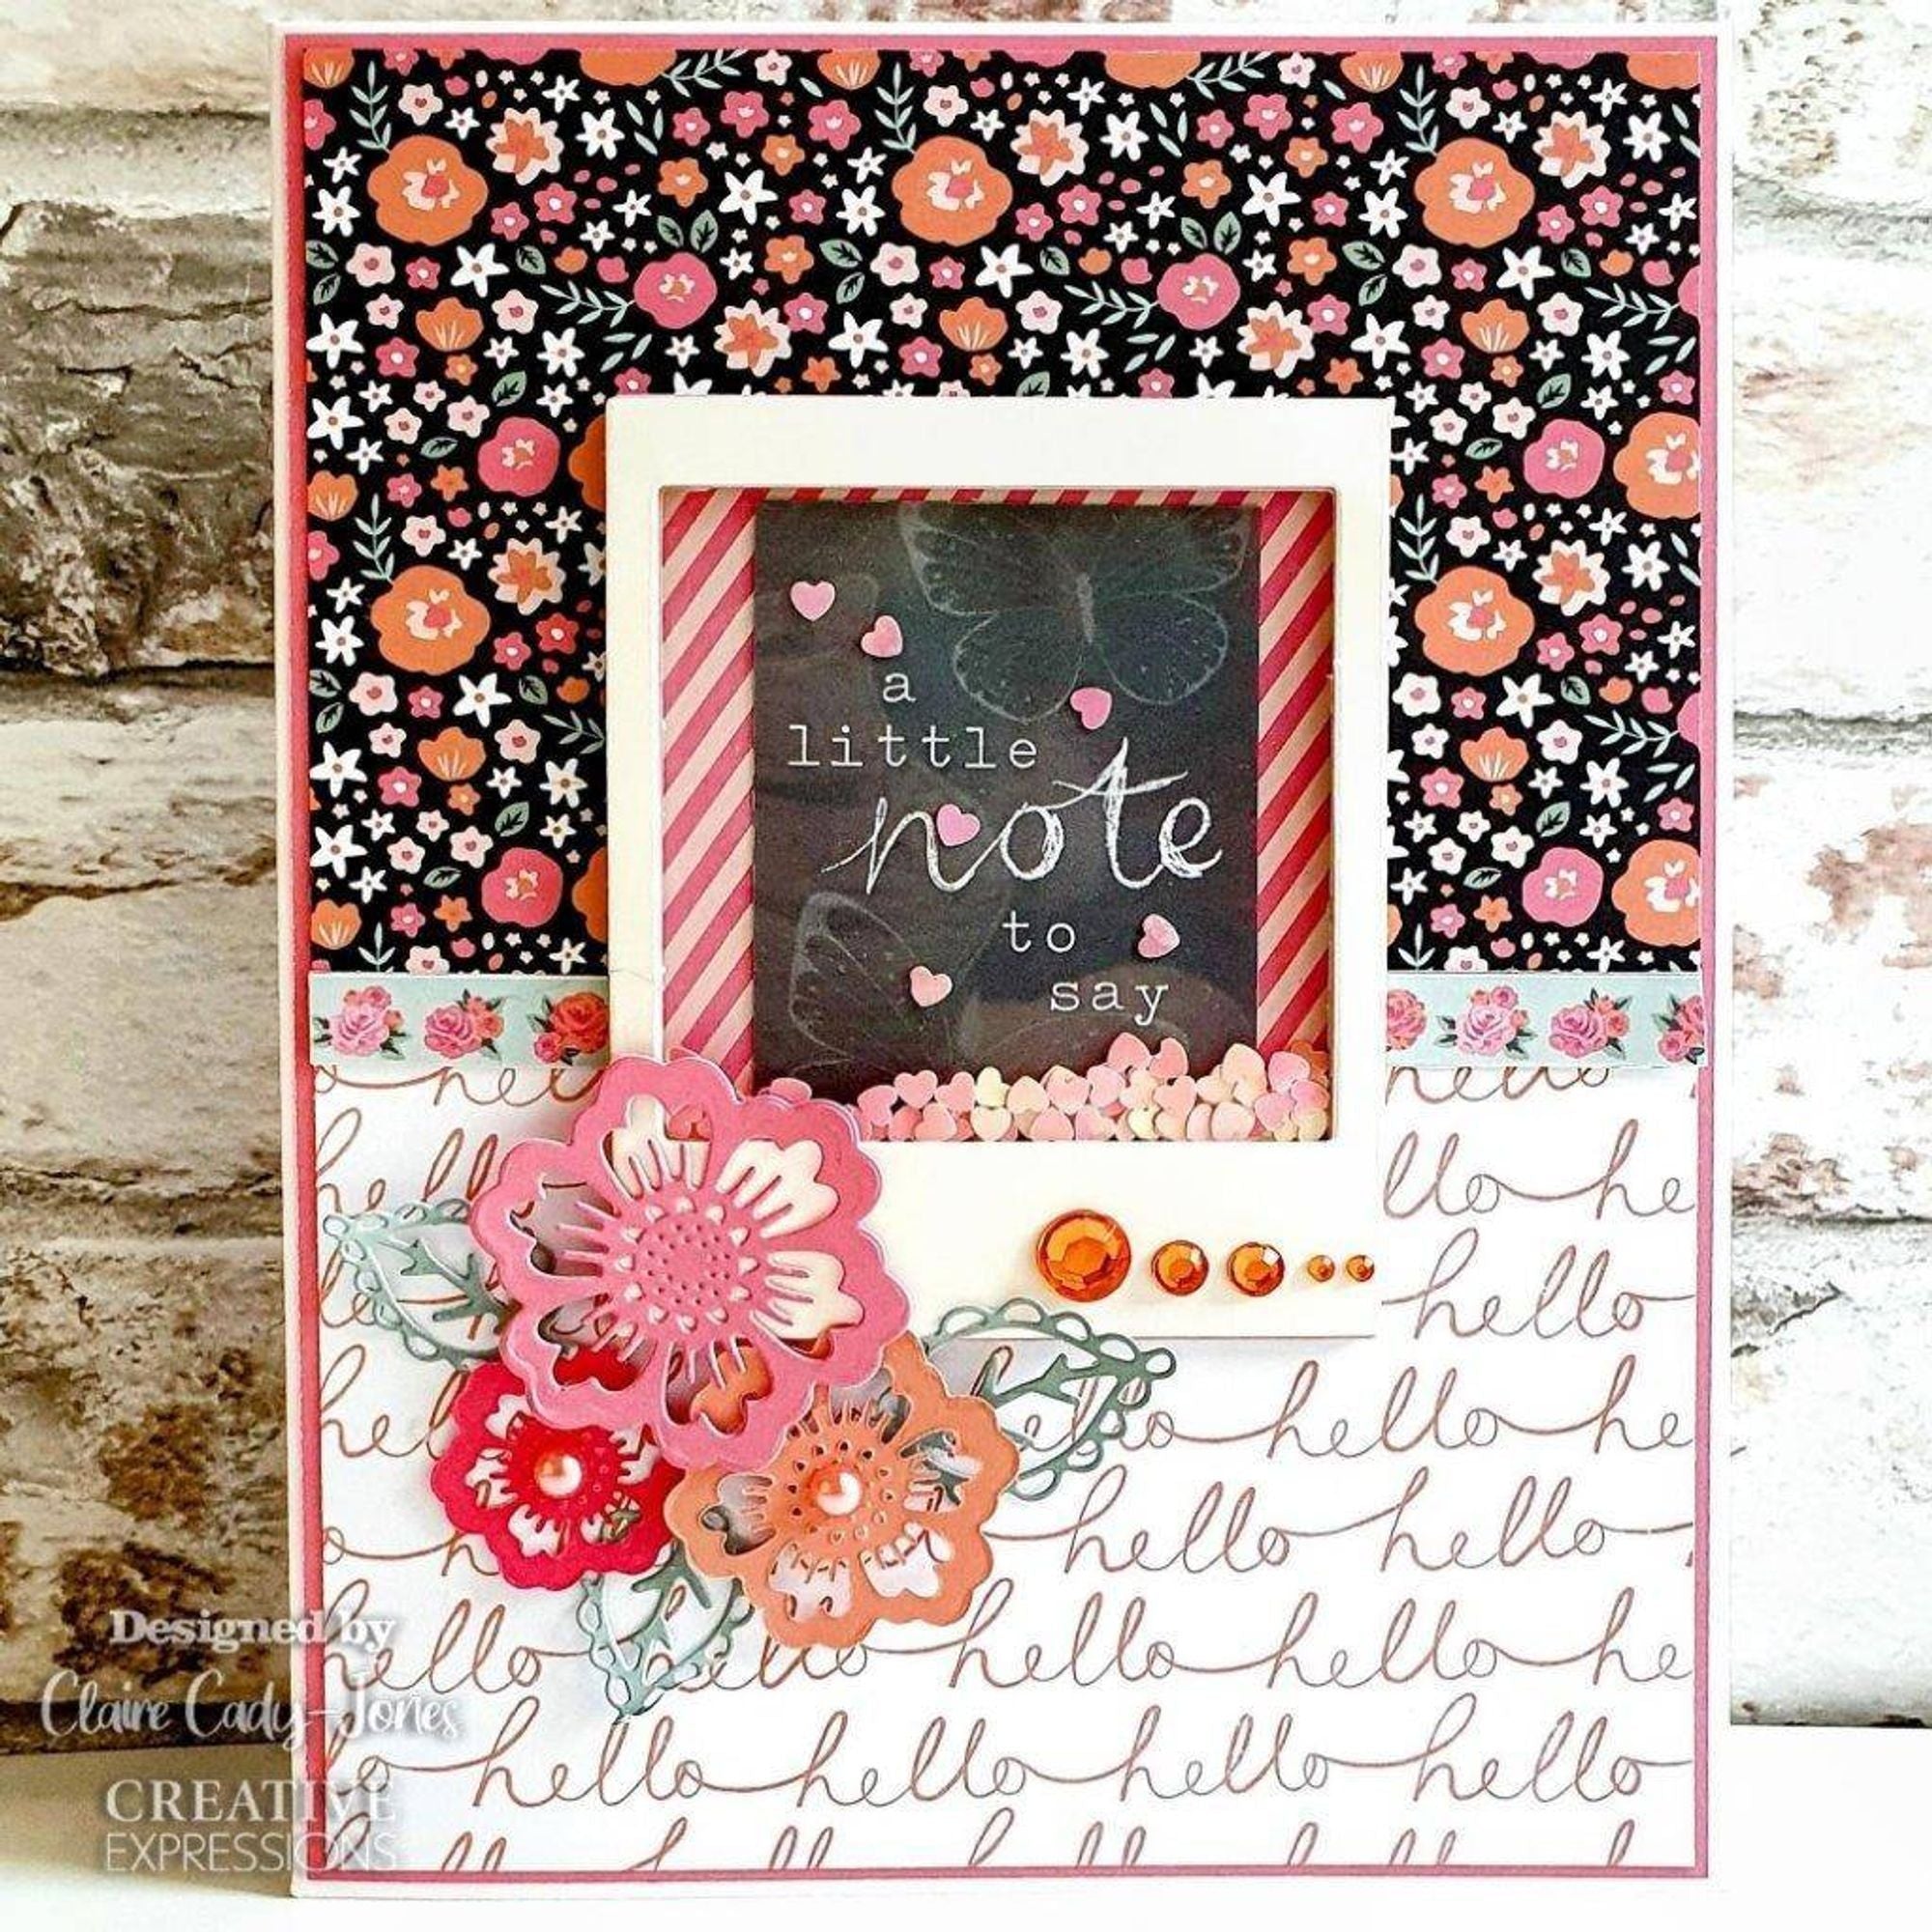 The Paper Boutique Lovely Days 8x8 Paper Pad